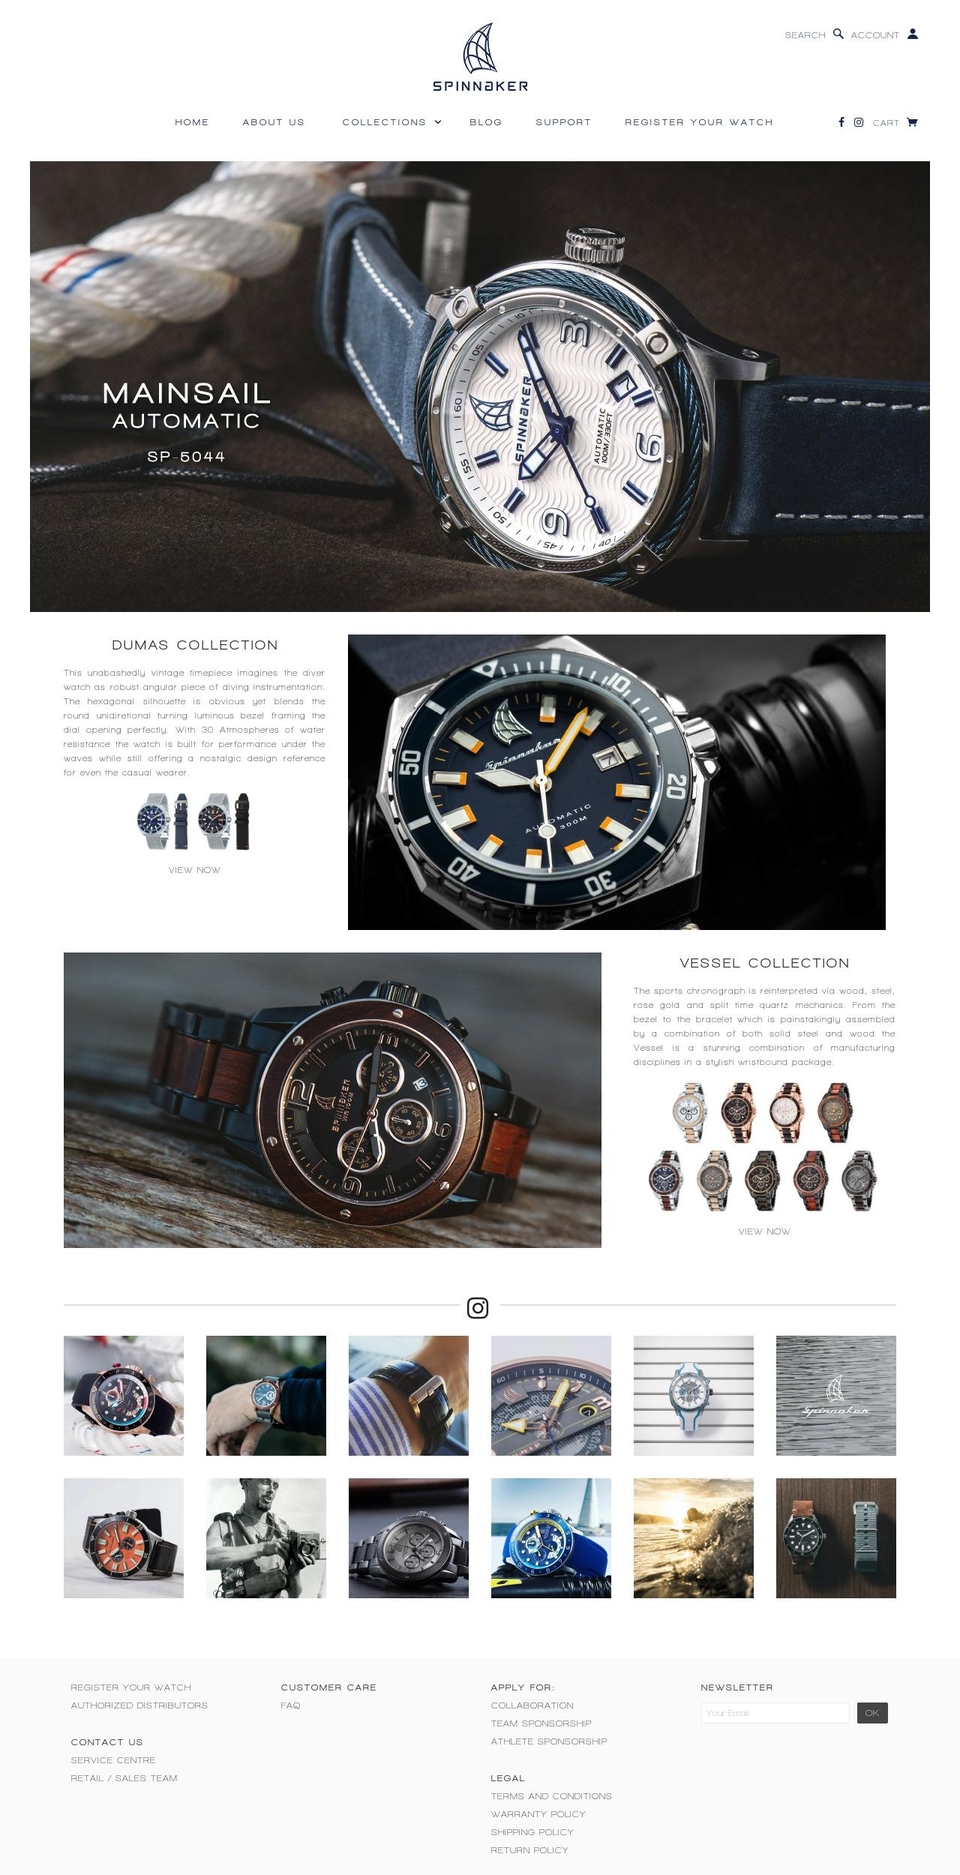 WATCHES Shopify theme site example spinnaker-watches.com